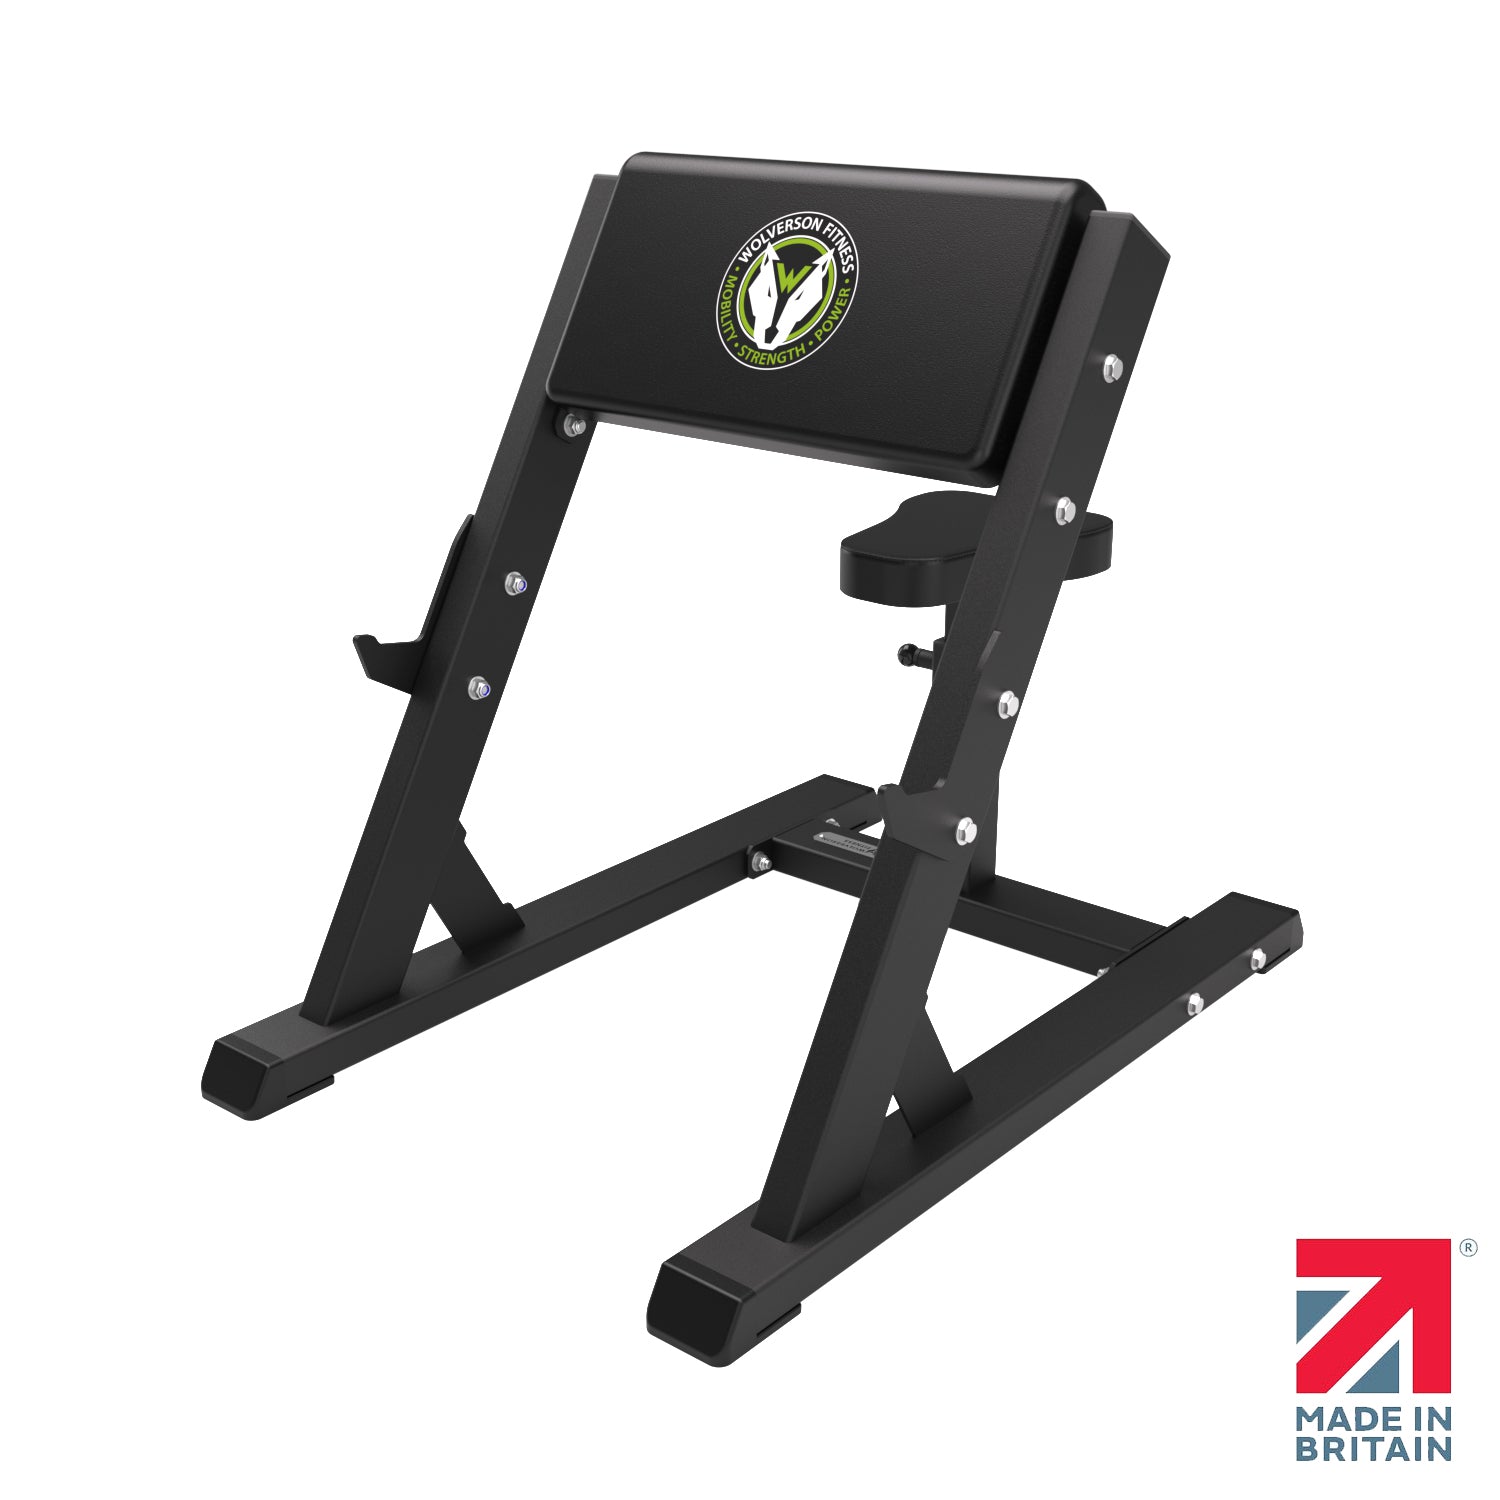 The Colossus Series Preacher Curl Bench